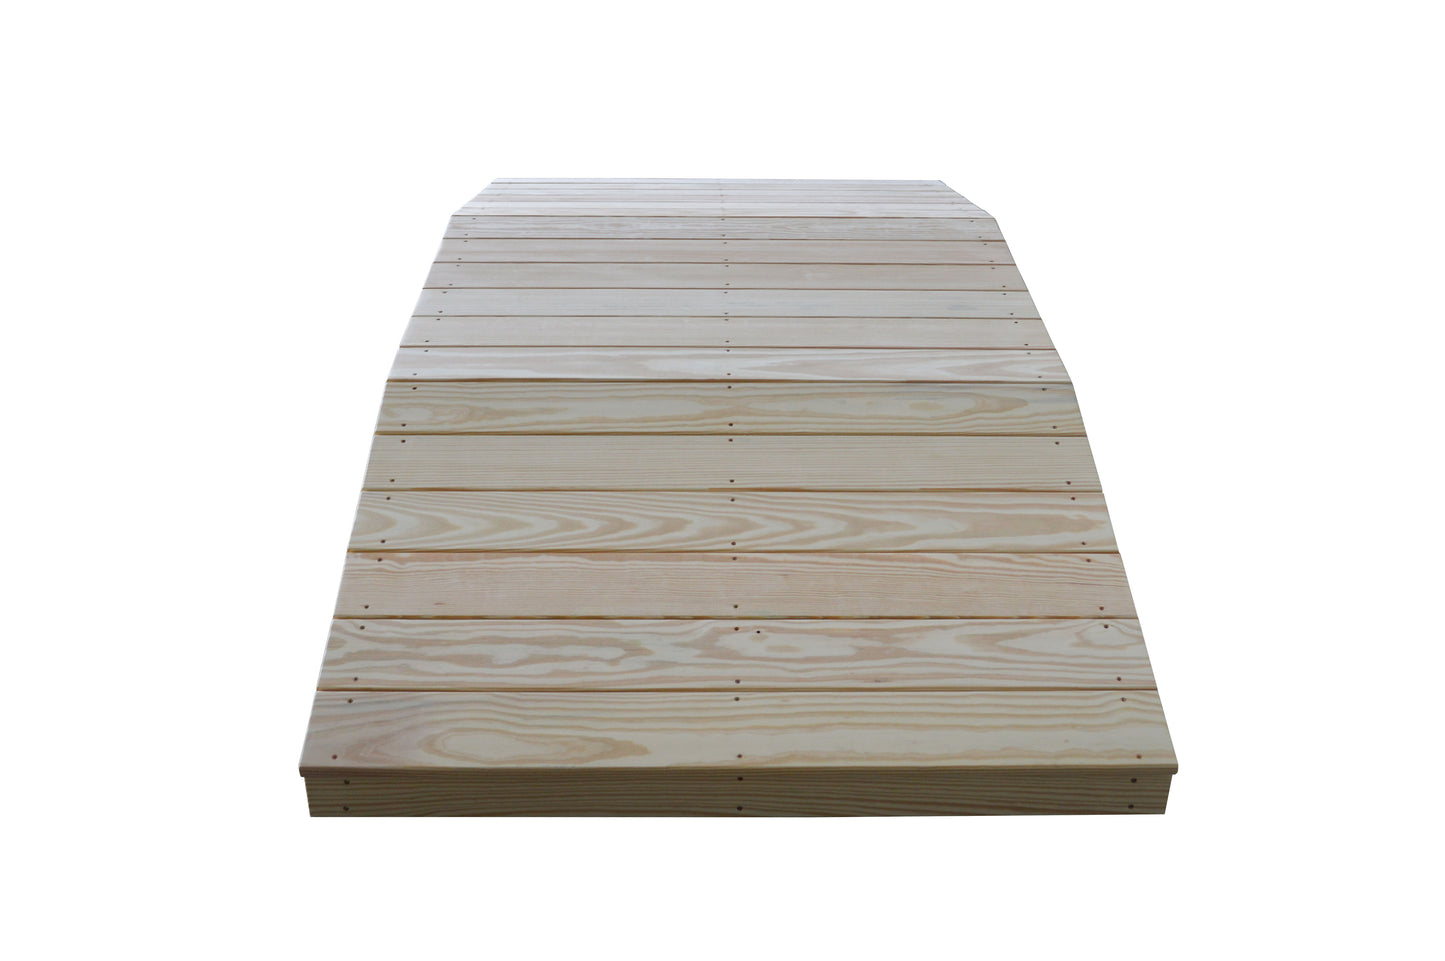 A&L Furniture Pressure Treated Pine 4' x 8' Standard Plank Bridge - LEAD TIME TO SHIP 10 BUSINESS DAY